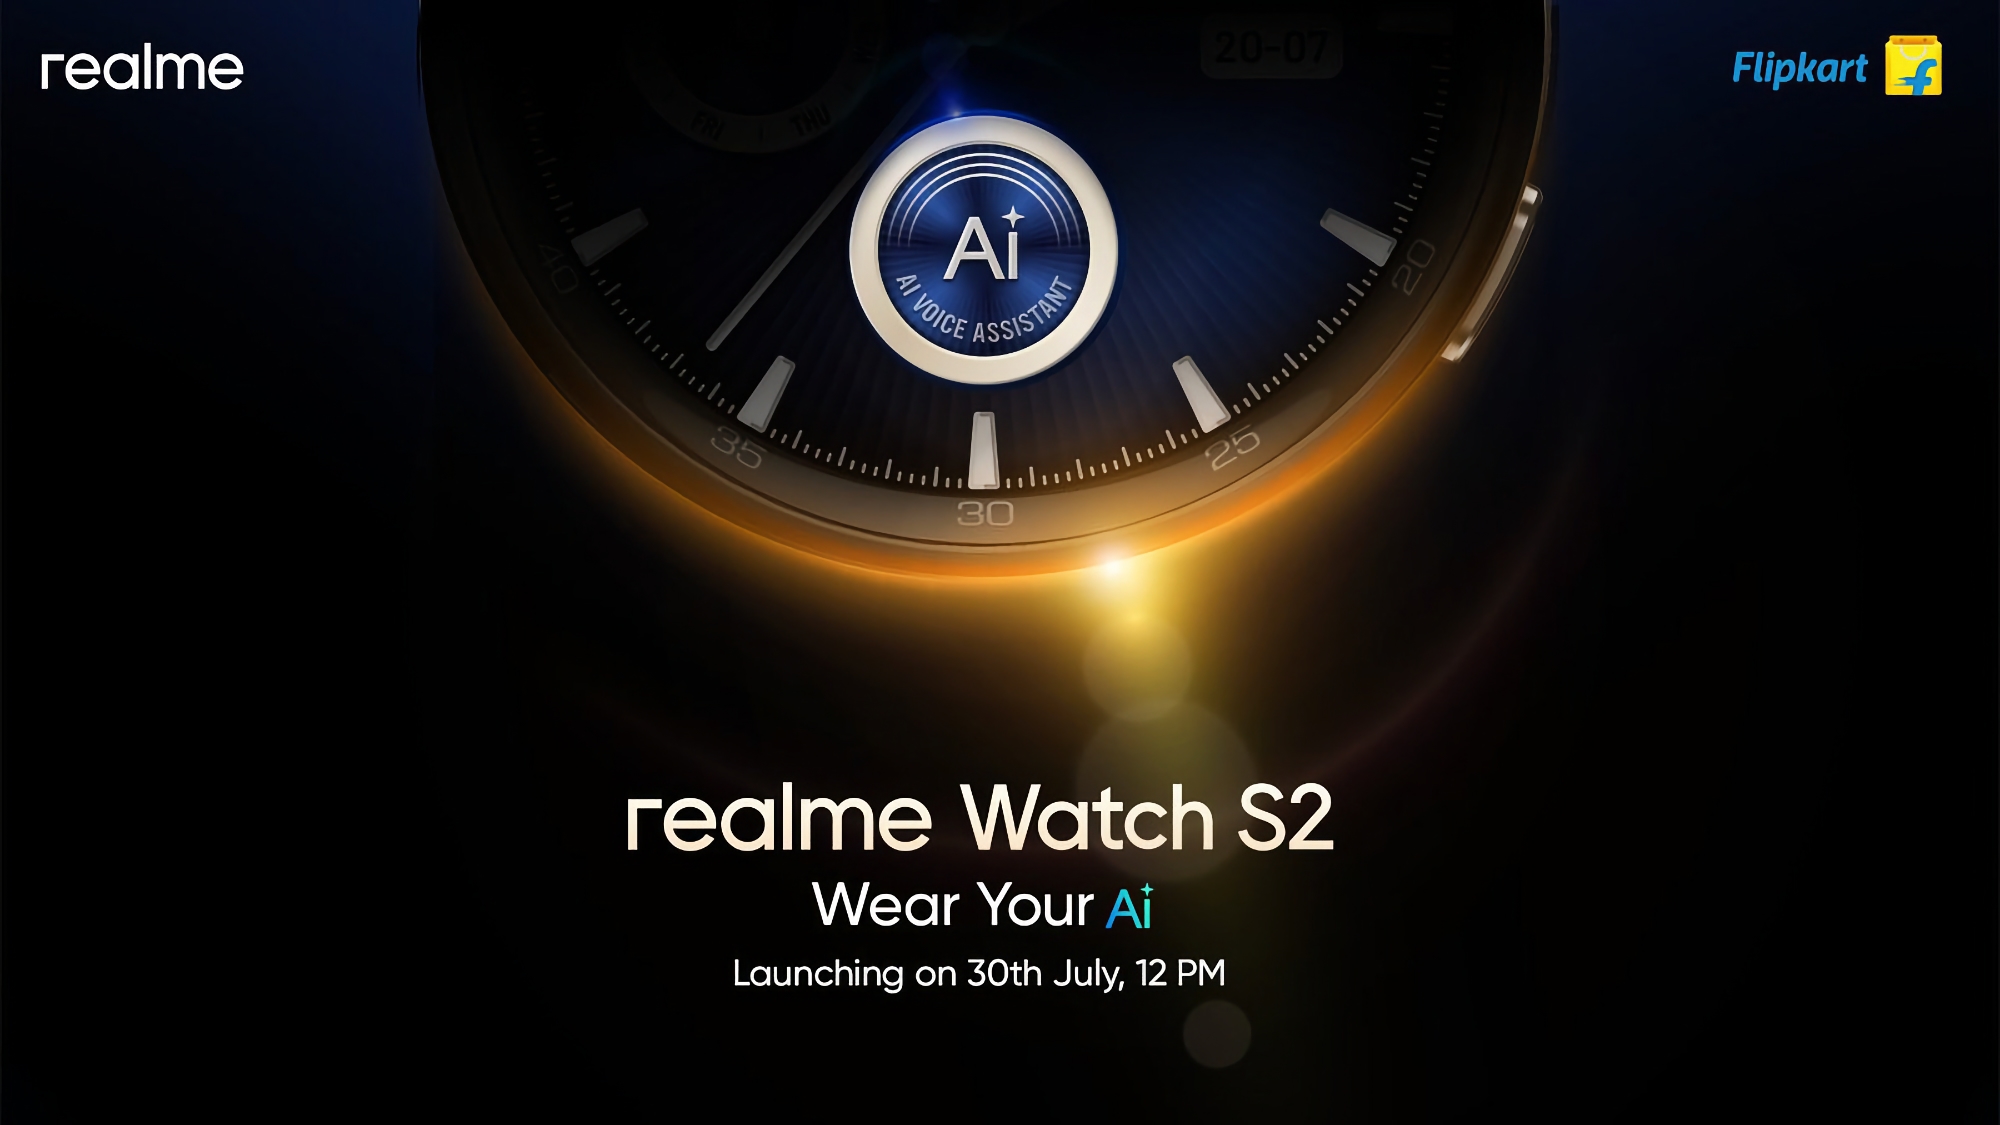 It's official: realme Watch S2 with ChatGPT support will debut on 30 July